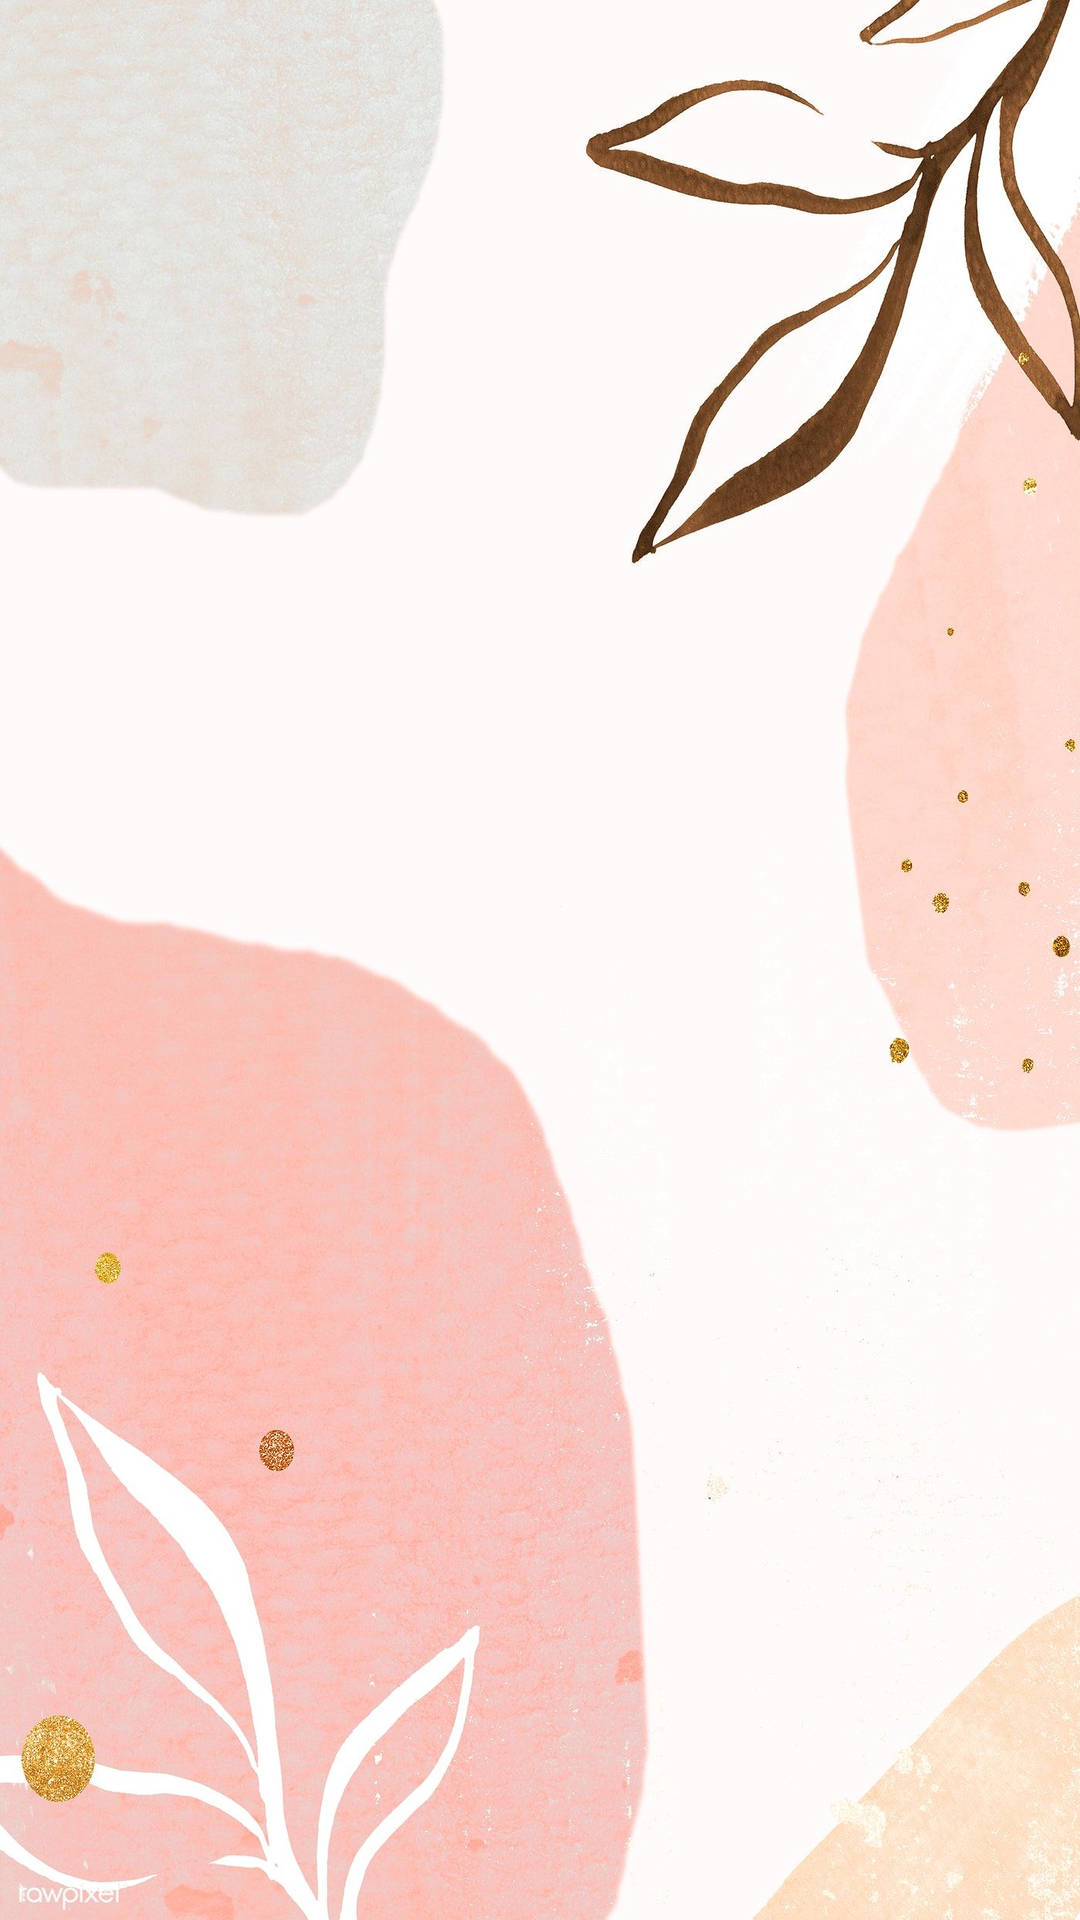 A Charming And Serenepastel Abstract Illustration Wallpaper